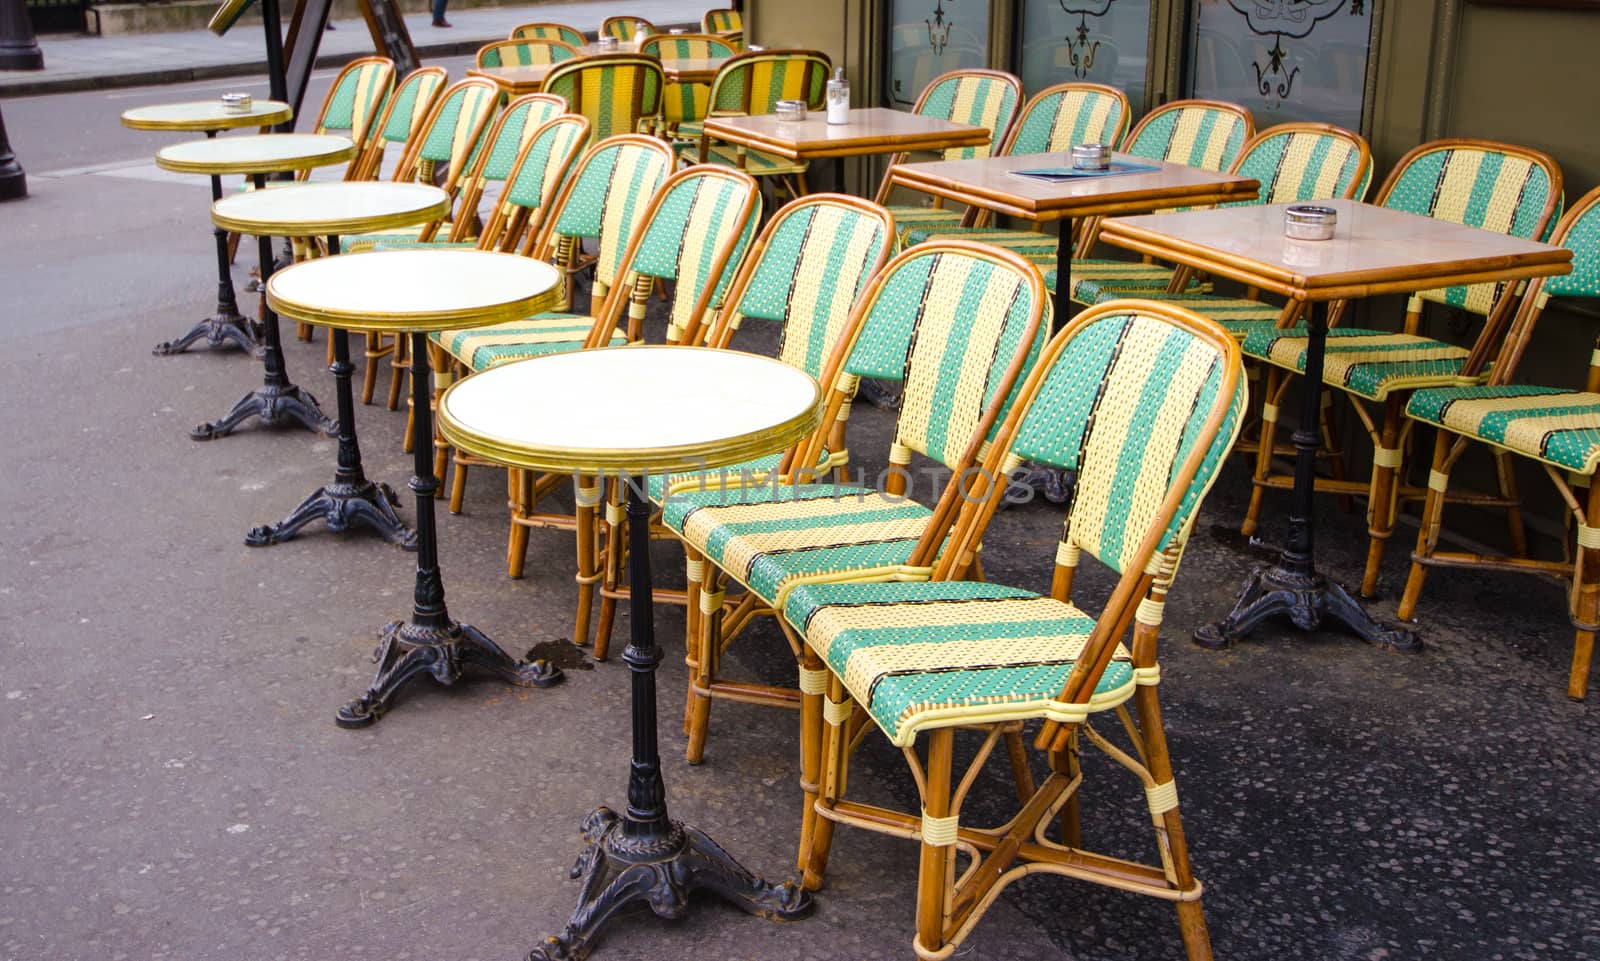 Chairs on the city street of Paris.